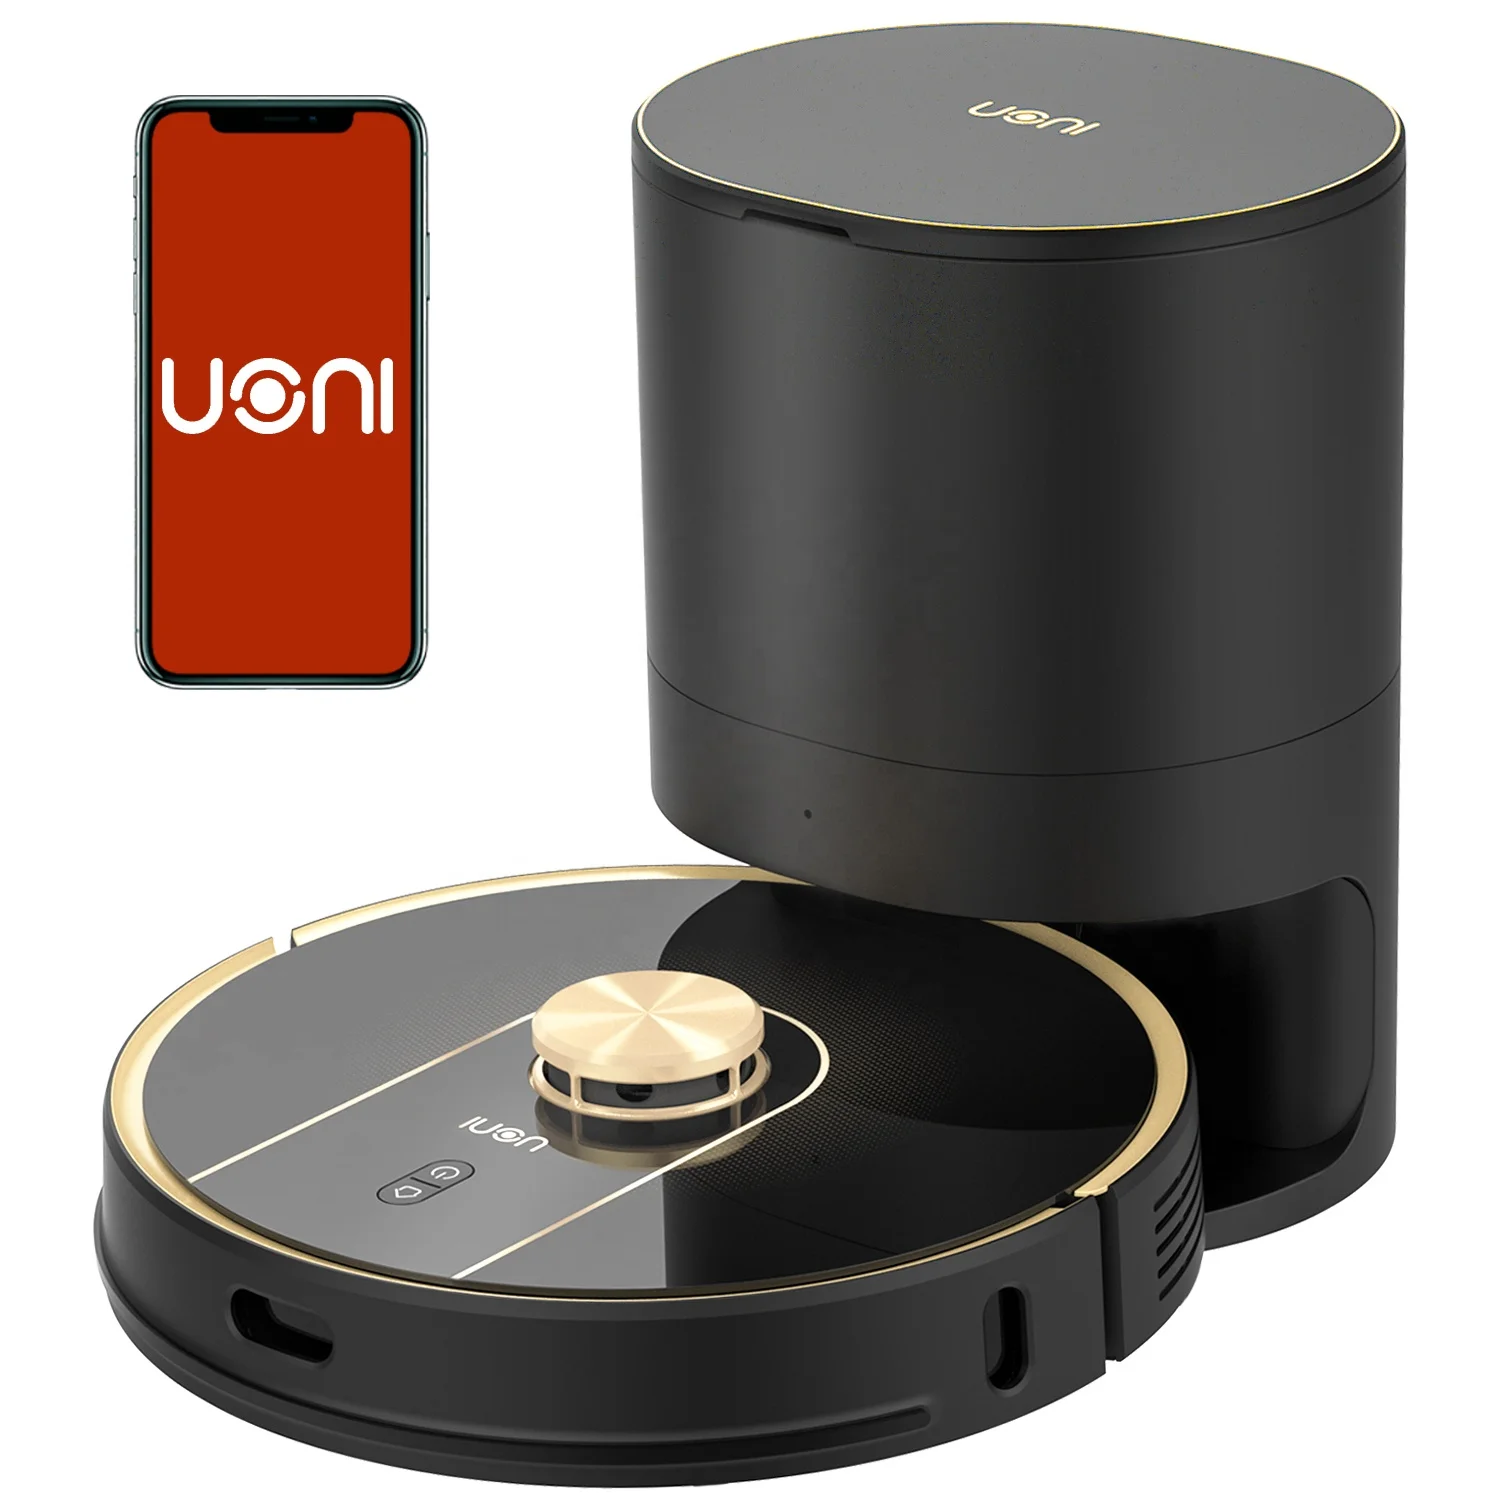 

Uoni robotic vacuum cleaner V980 Plus with 4.3L self-emptying dustbin home appliances smart vacuum cleaner robot